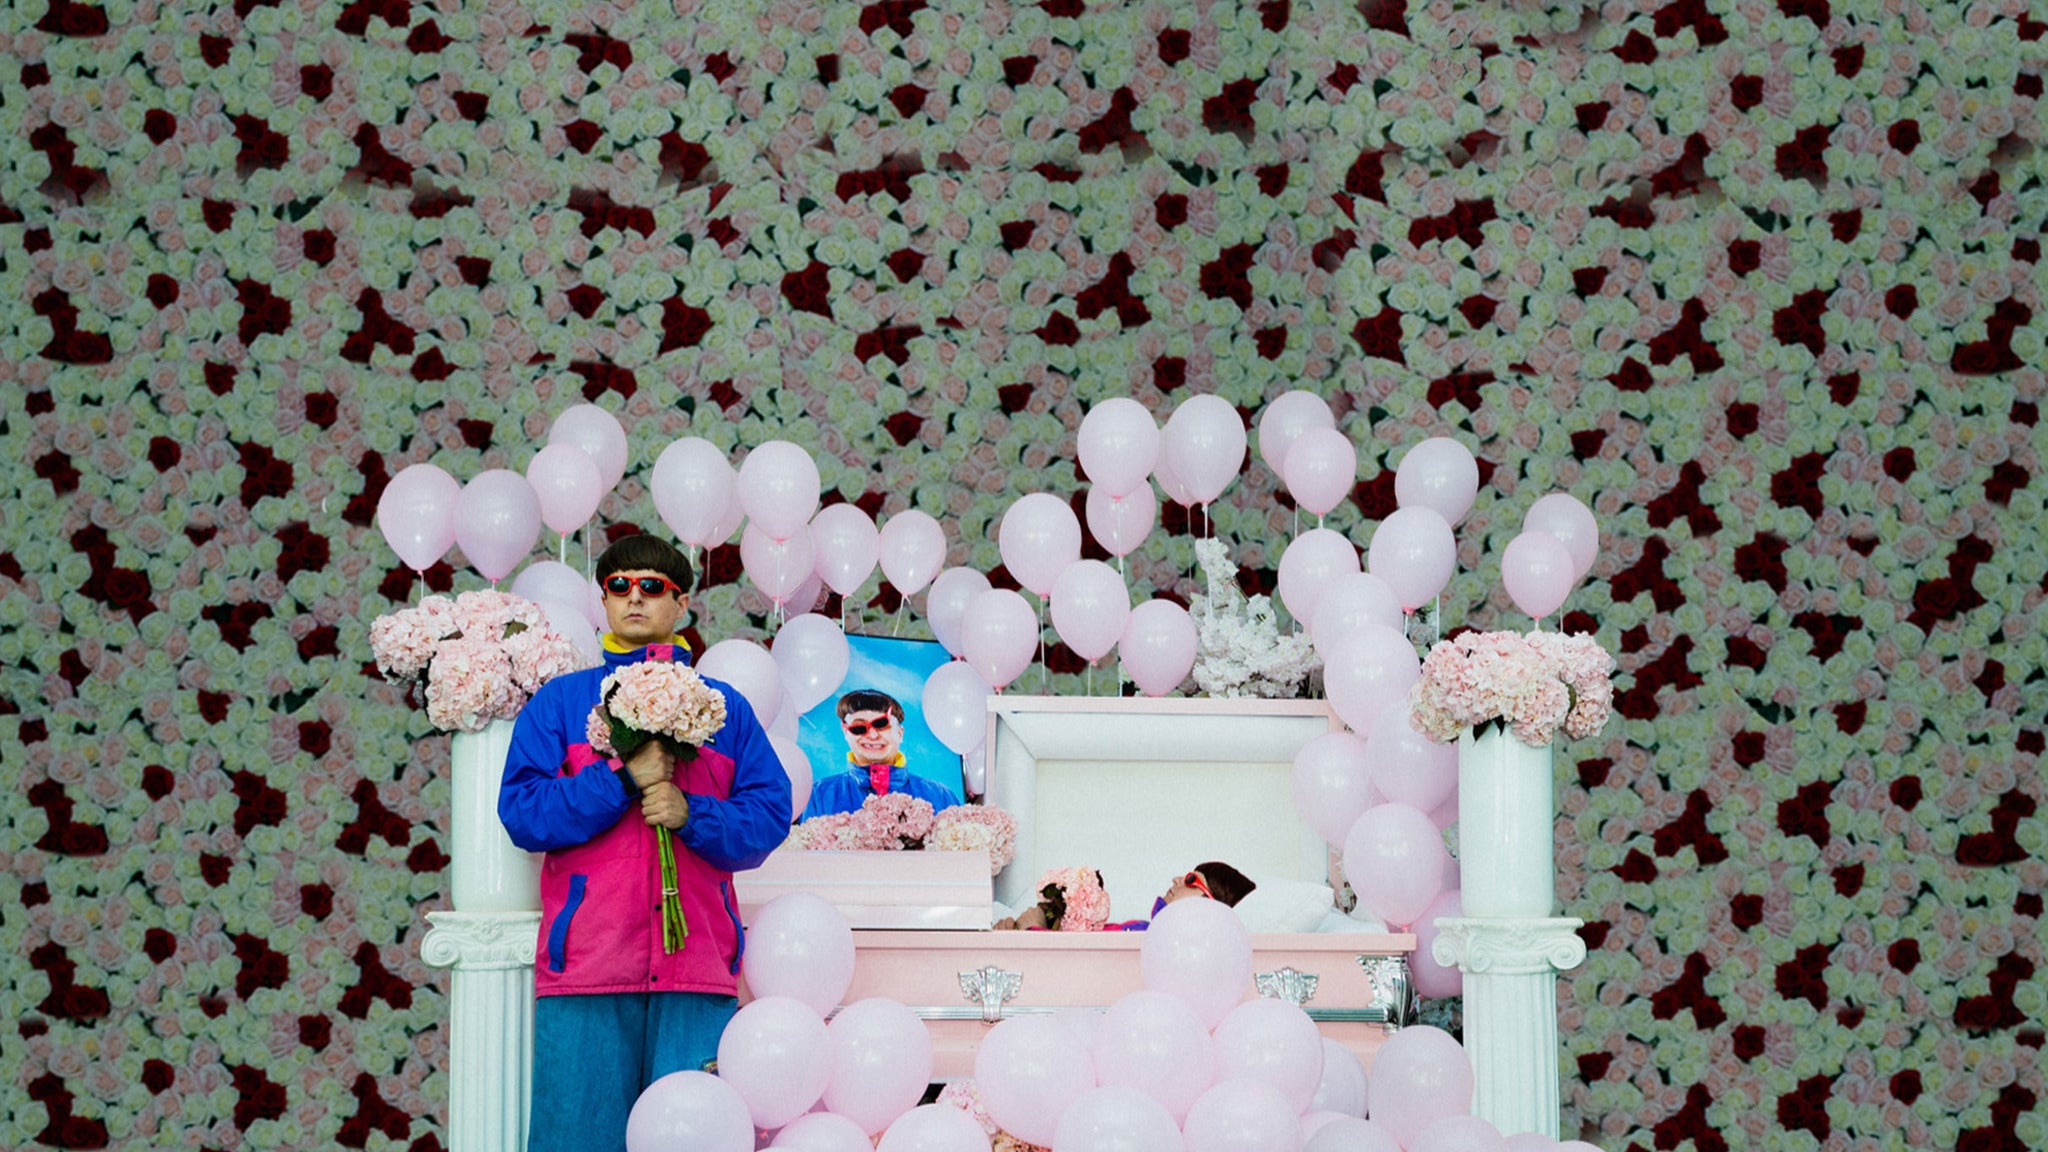 Oliver Tree - Goodbye Farewell Tour in Indianapolis promo photo for Artist presale offer code